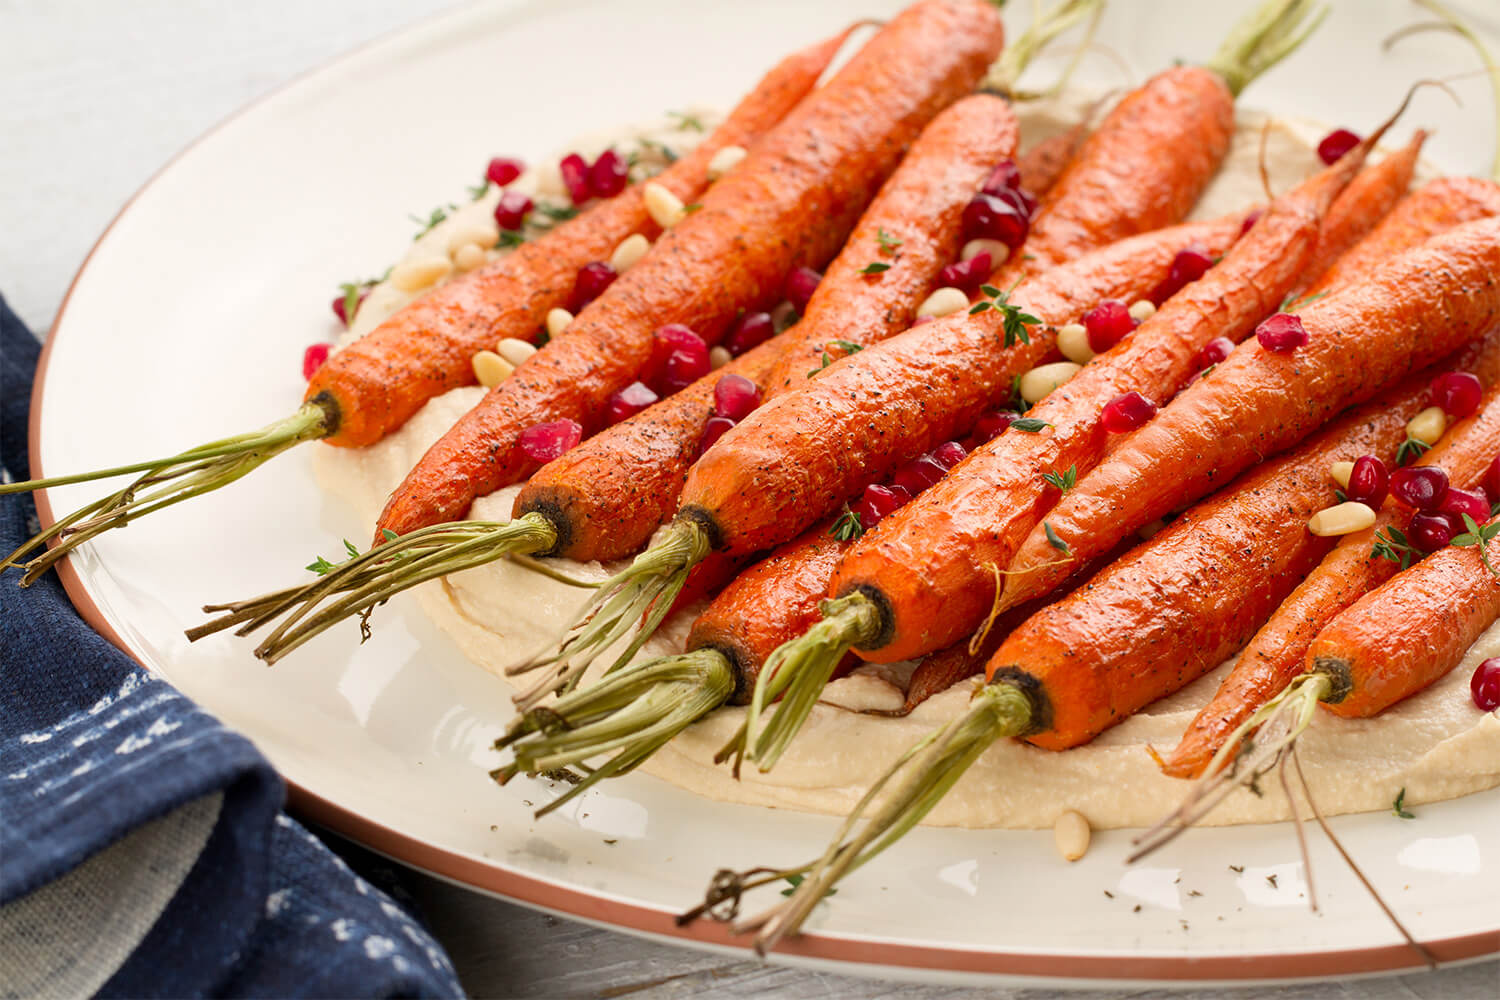 Whole-Roasted-Carrots-with-Topped-Organic-Garlic-Hommus.jpg